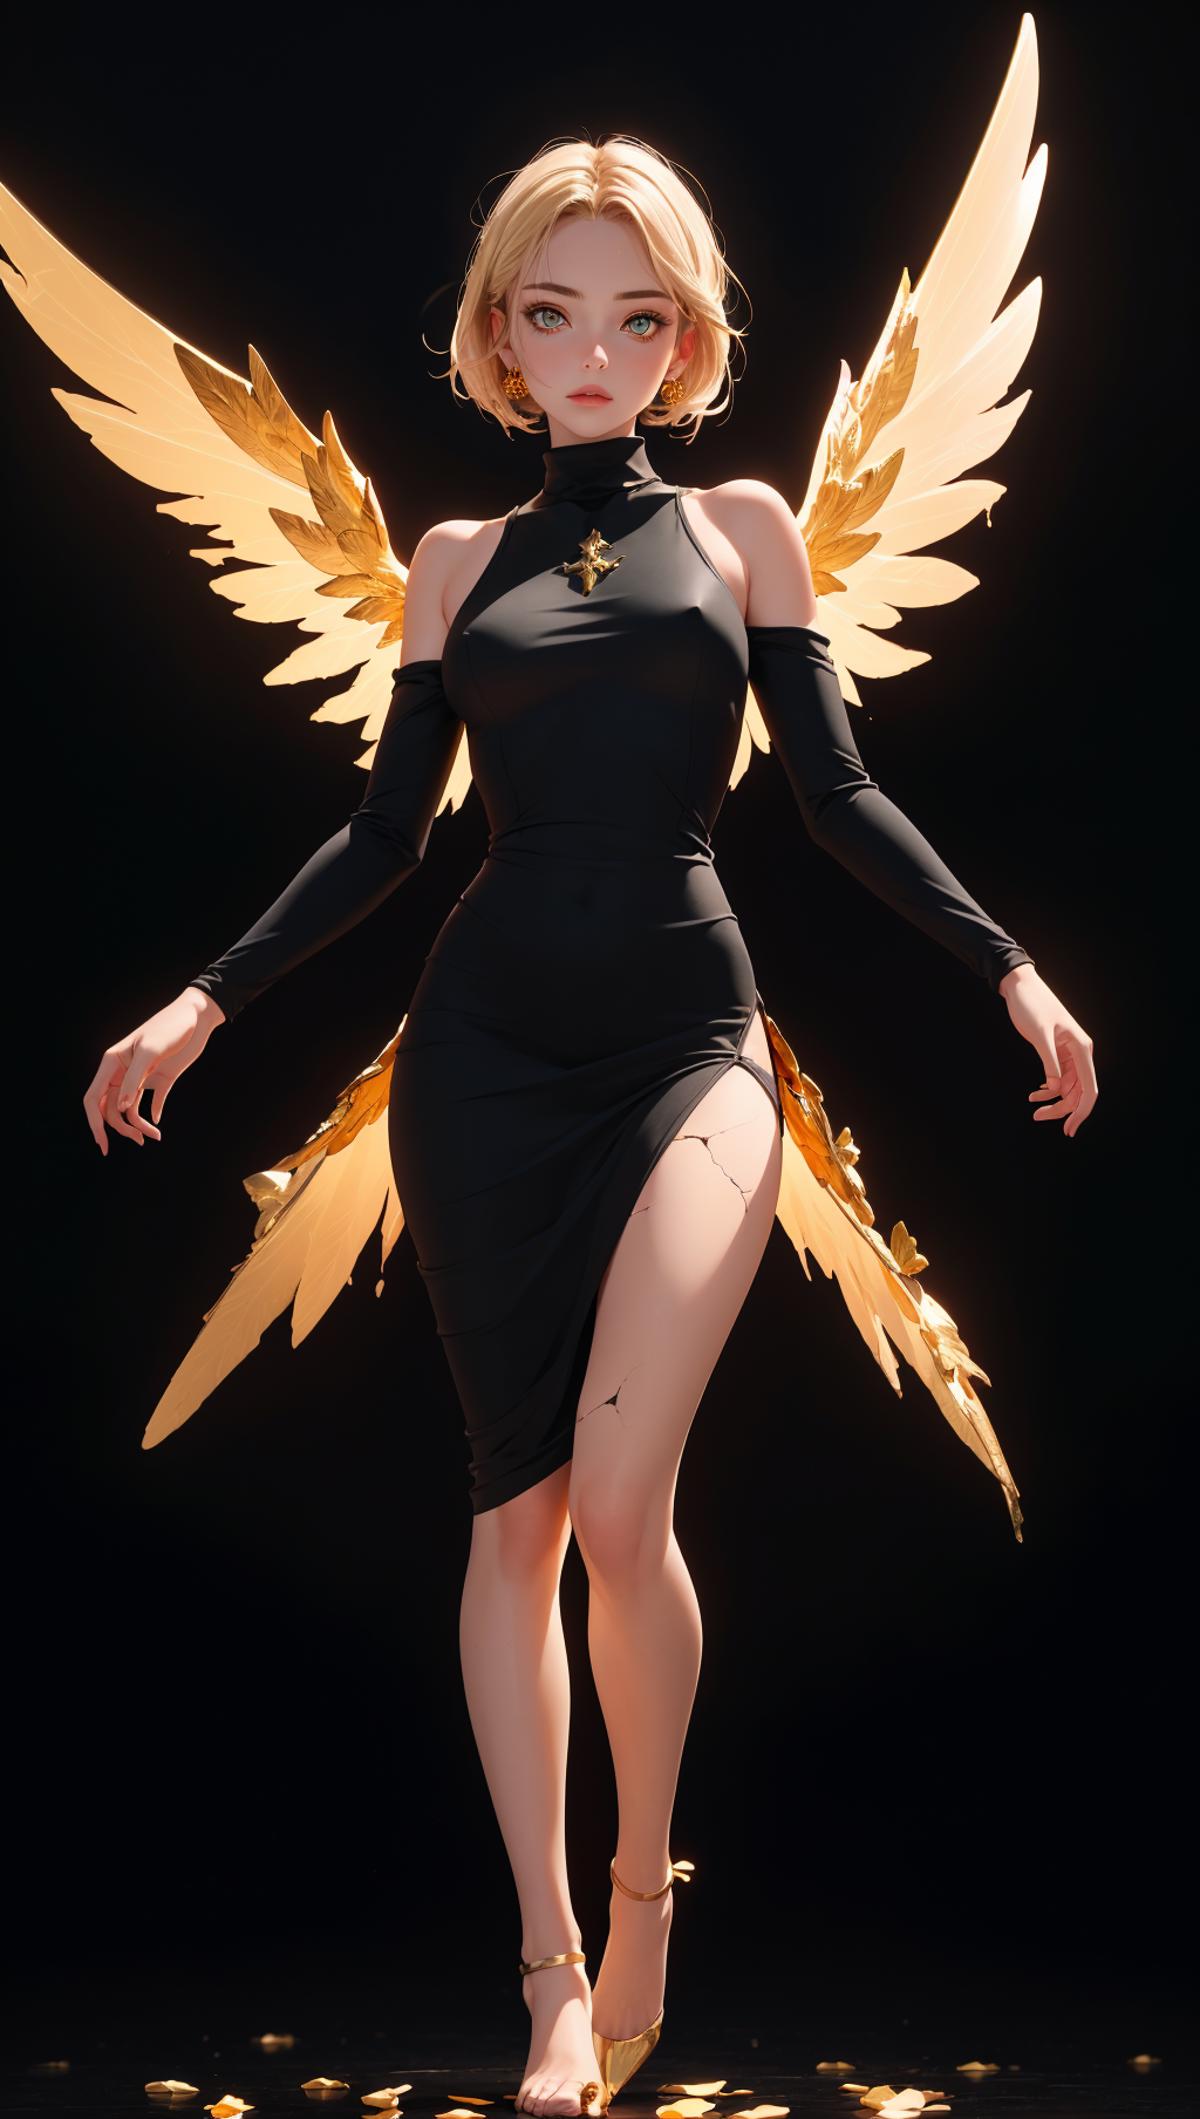 A black and gold dress with wings on the back, worn by a woman with a scar on her leg.